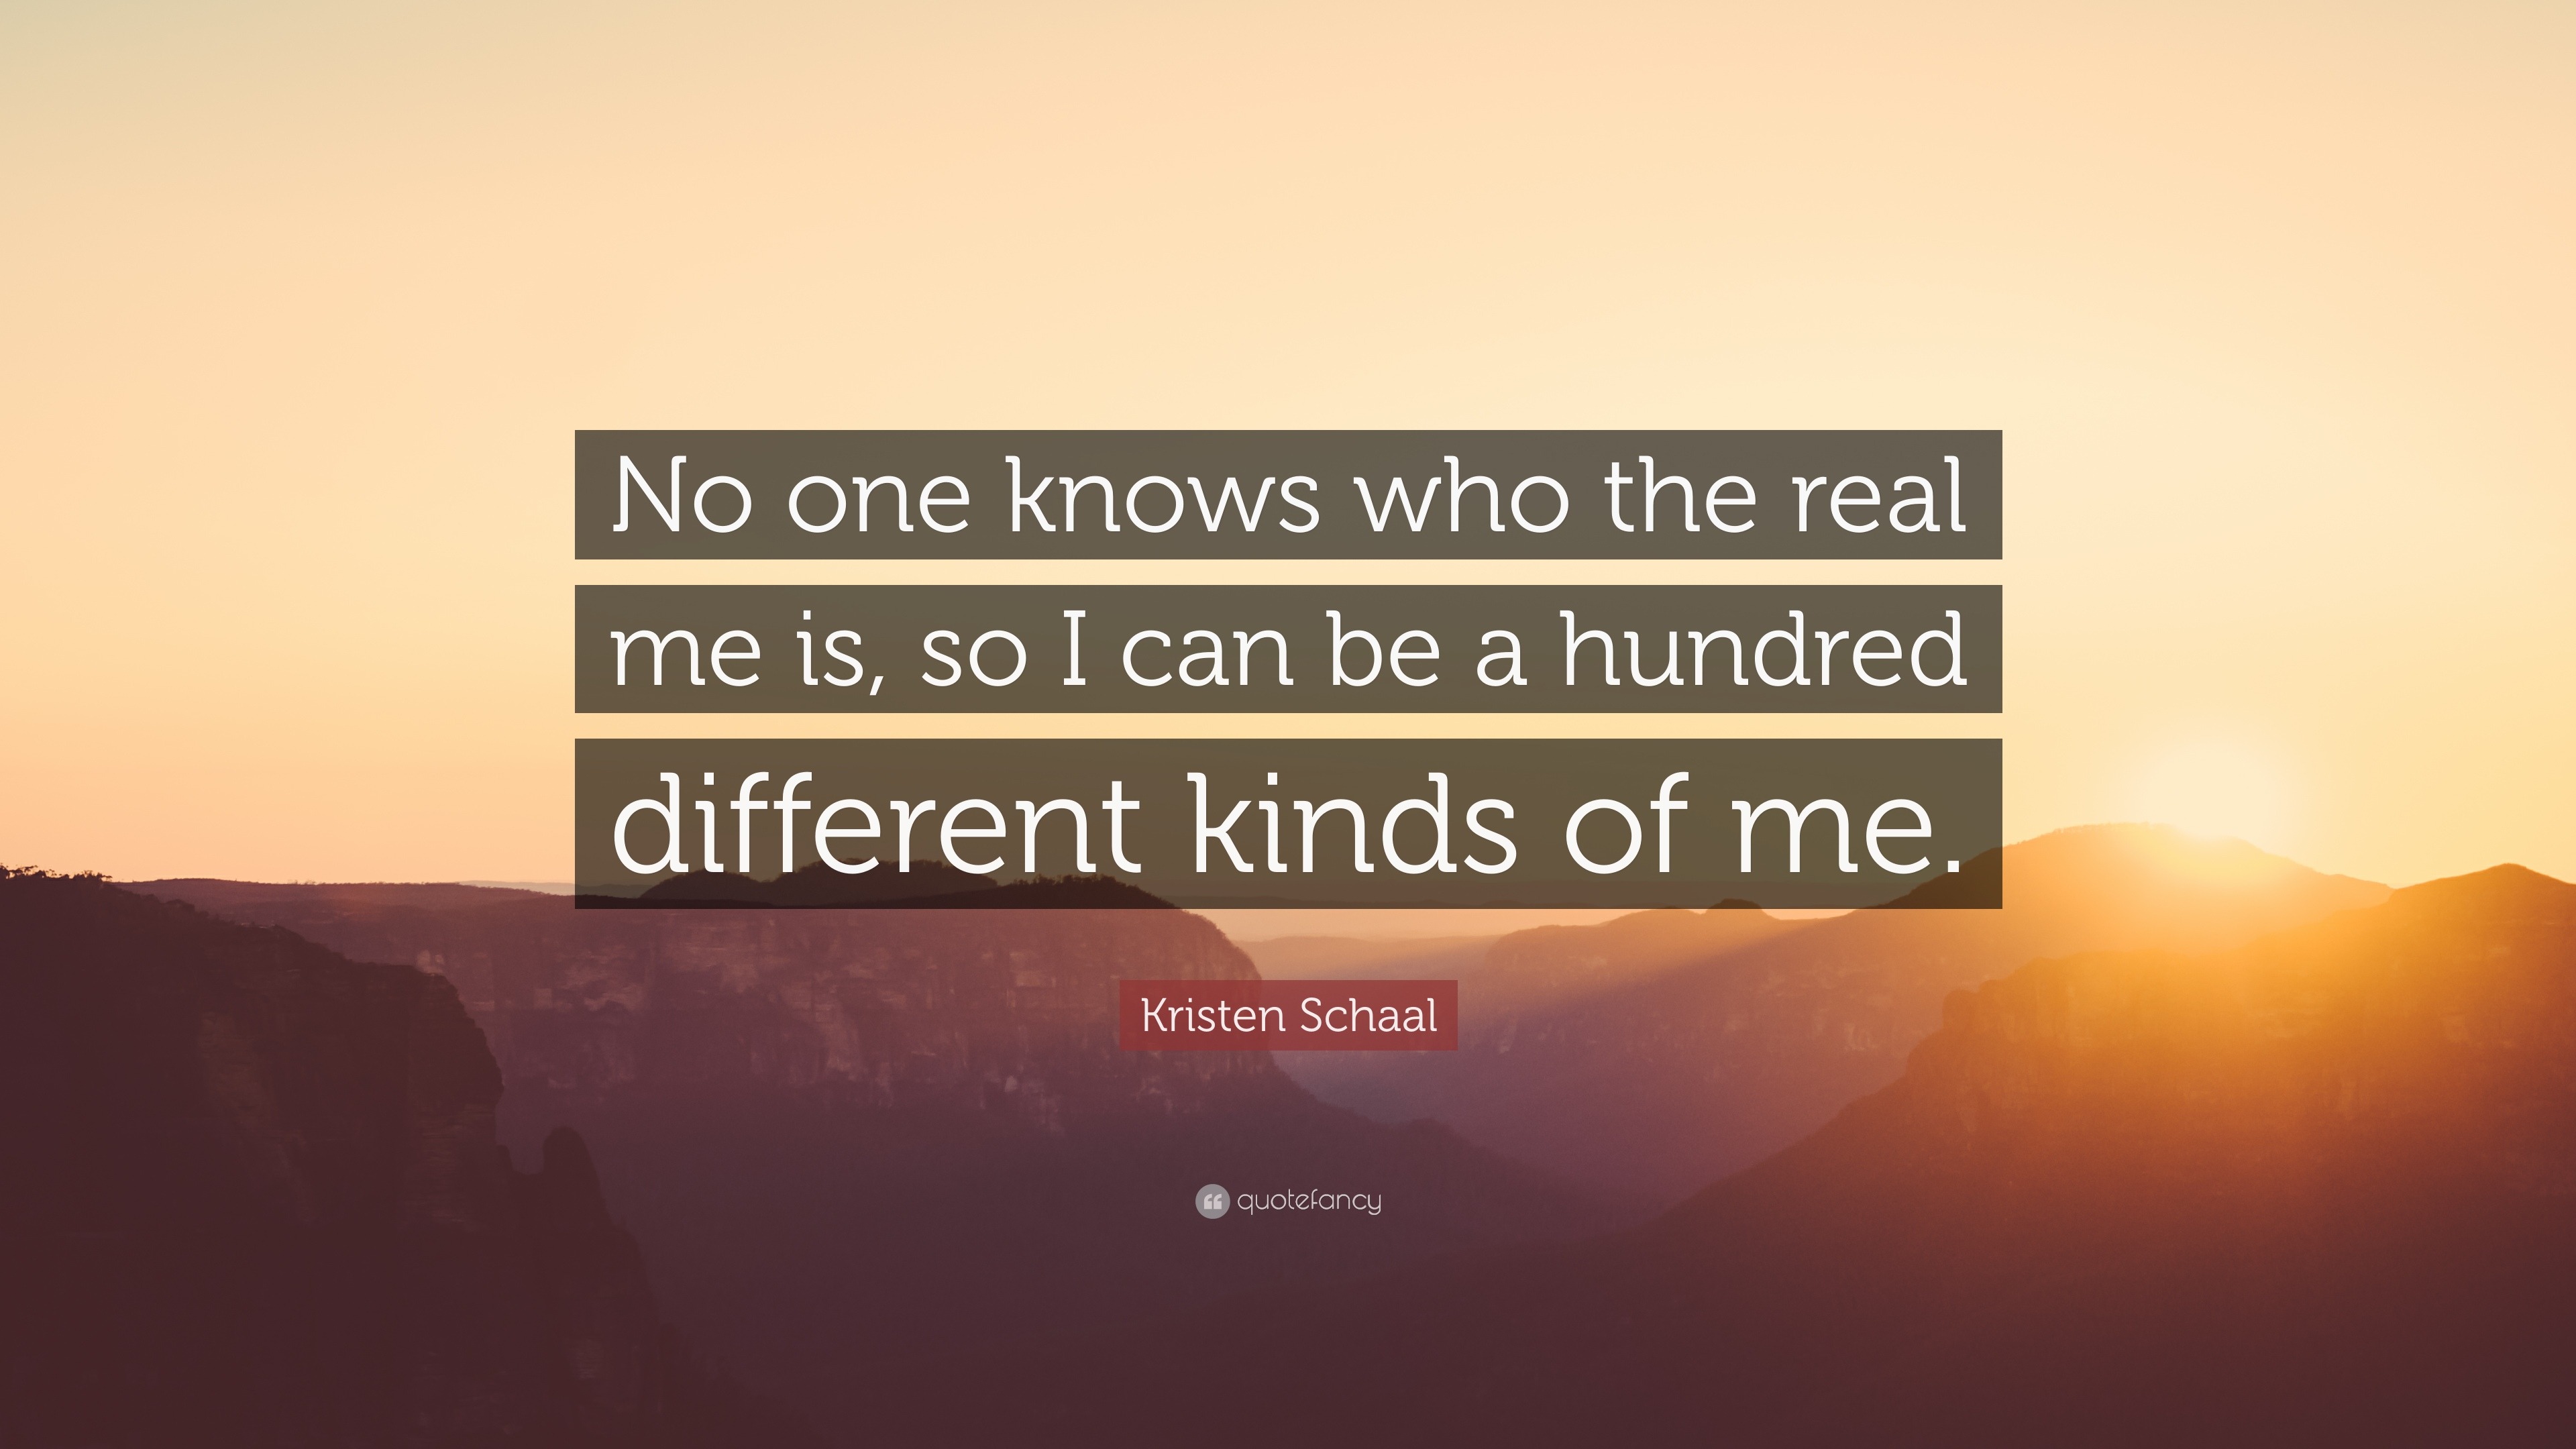 https://quotefancy.com/media/wallpaper/3840x2160/1187452-Kristen-Schaal-Quote-No-one-knows-who-the-real-me-is-so-I-can-be-a.jpg